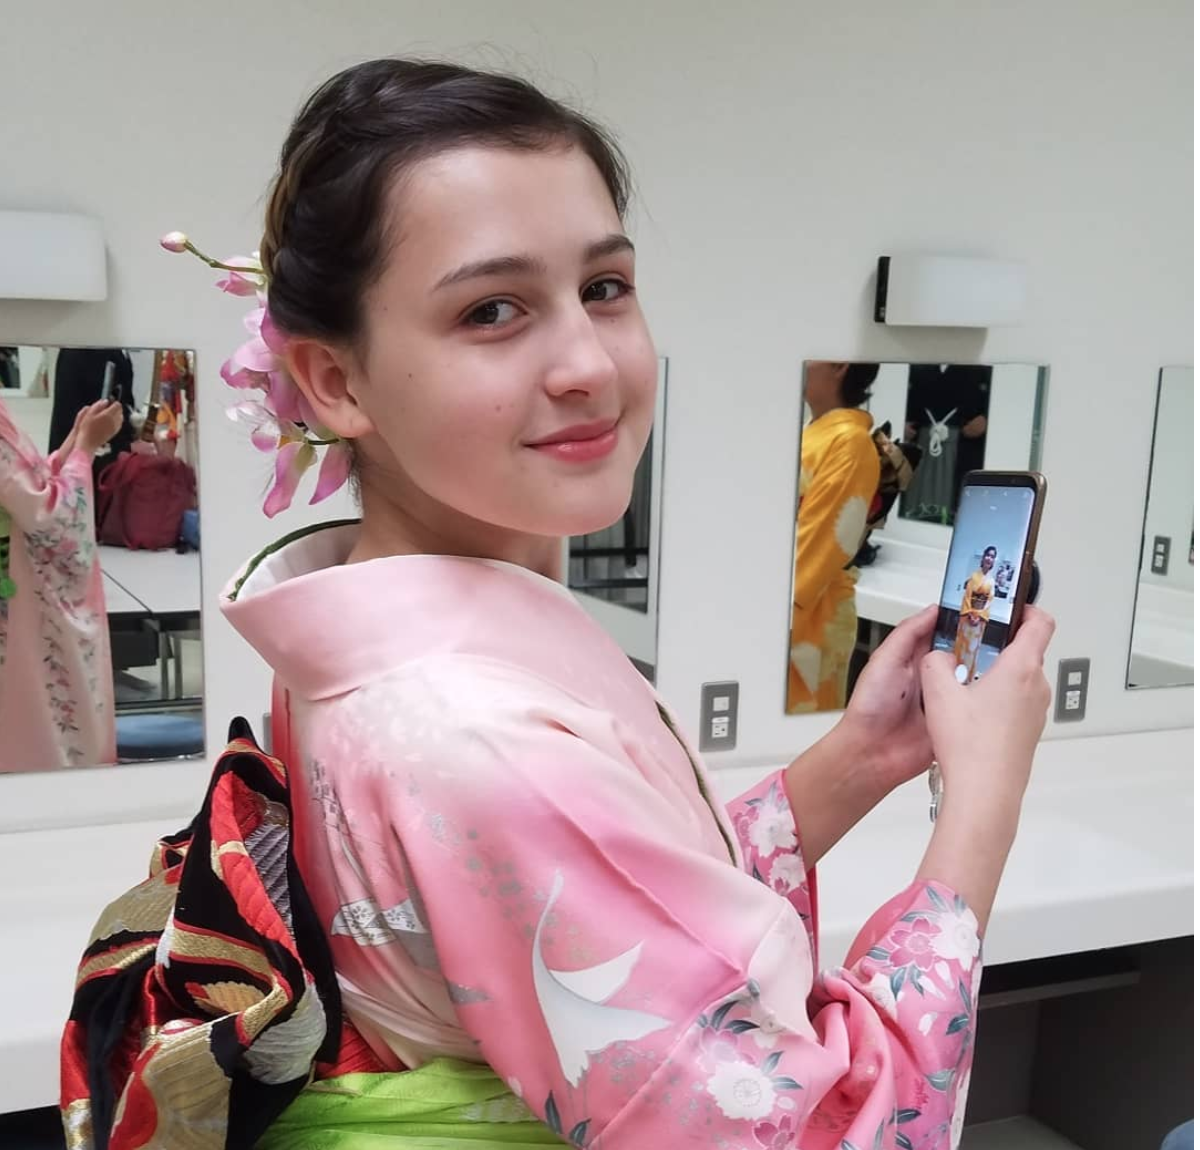 Learn about Japanese language and culture when you study abroad in Japan with The Experiment. Develop your skills through Japanese language immersion, exploring vibrant Tokyo neighborhoods, and living with a Japanese homestay family.  High school student in a kimono